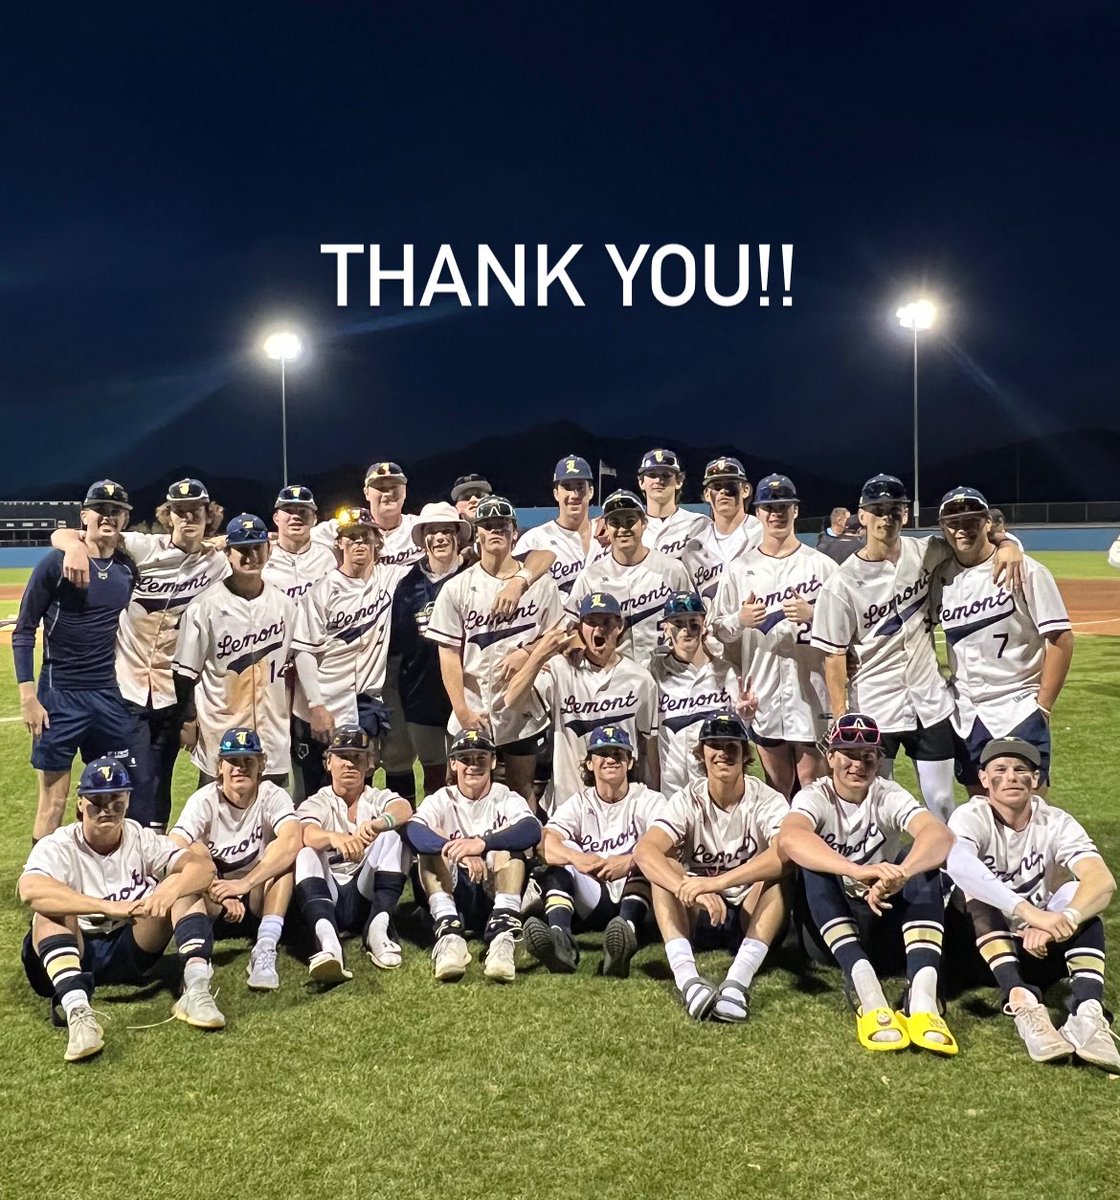 In anticipation of Teacher Appreciation week beginning on Monday, our players wrote Thank you letters to a teacher that has made an impact on them and gave them an autographed ball. Thank you for all that you do! It does not go unnoticed! #WeAreLemont